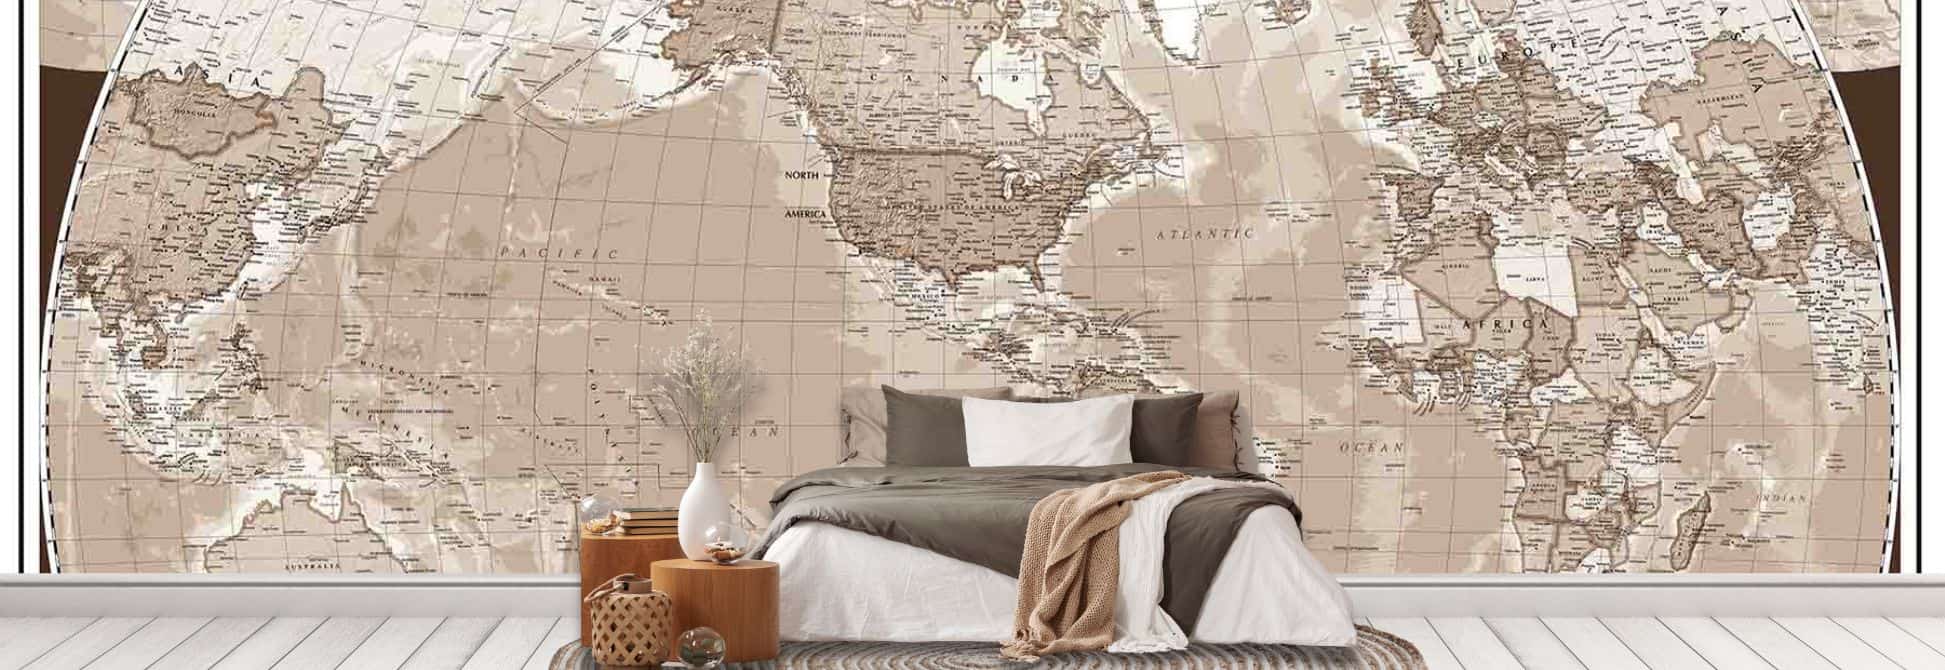 Shop World Wall Map Wallpaper, like this vintage map mural in a bedroom, from About Murals.